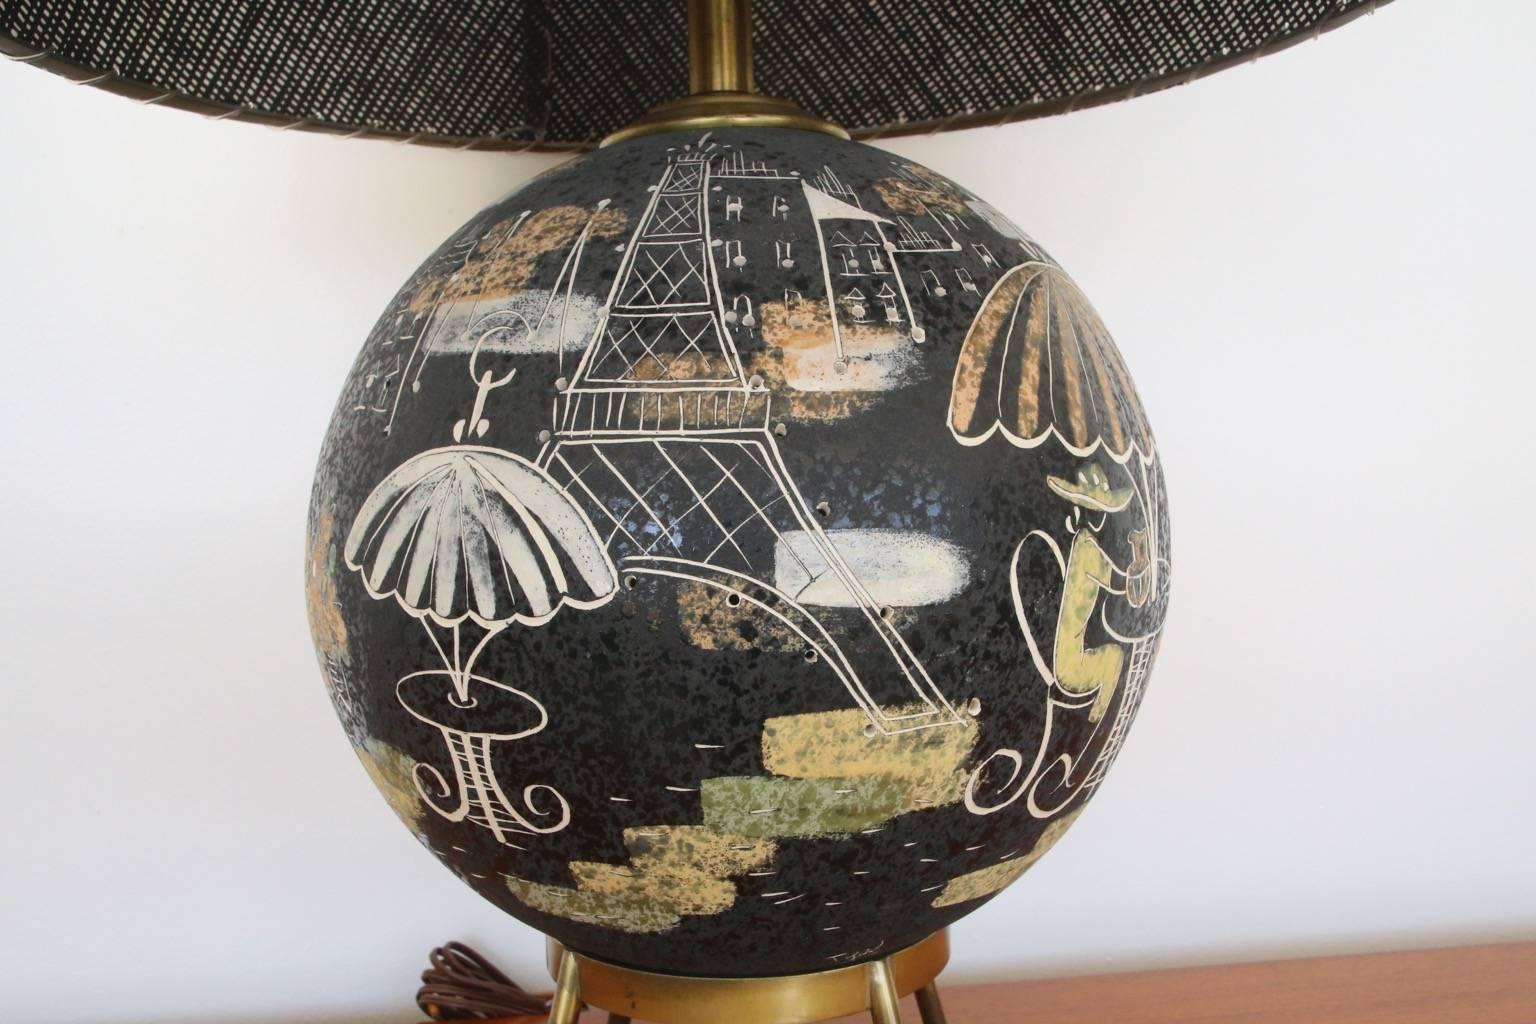 Very nice ceramic lamp by Tye of California. The sphere lights up to illuminate the city scene windows and sky. Eiffel tower and cafes. Fiberglass shade included.